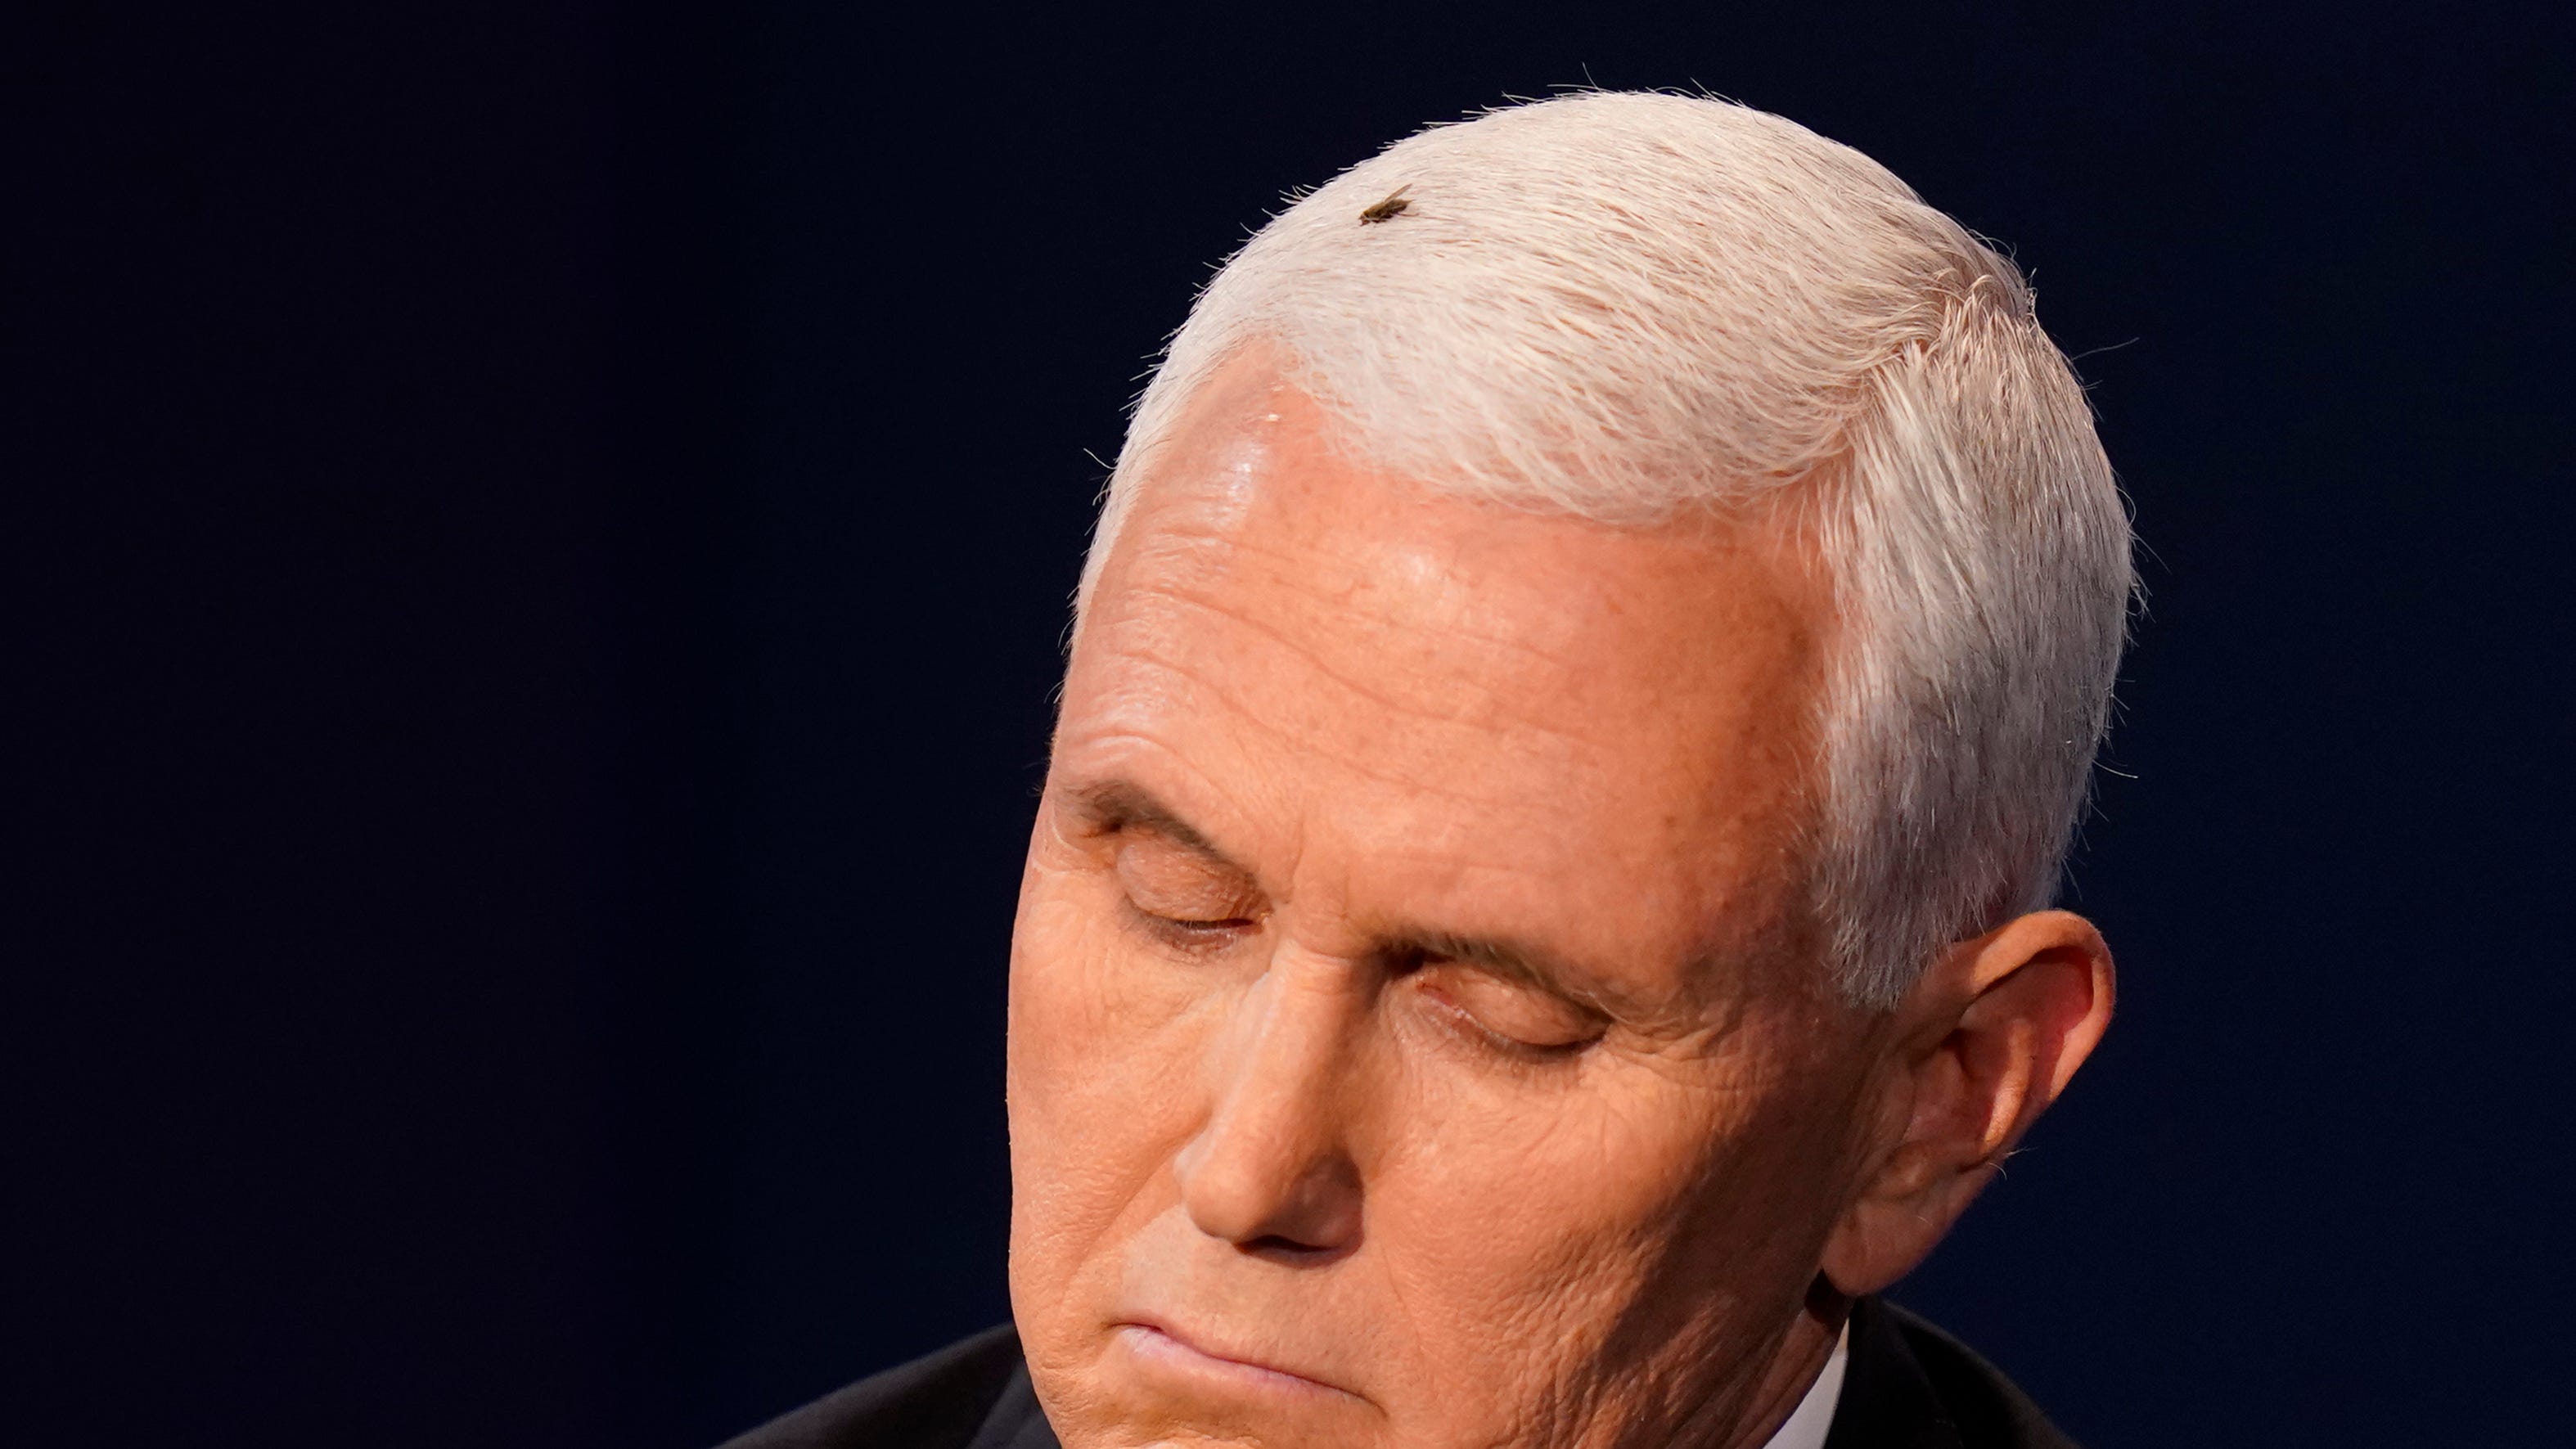 Pence Harris Debate Substance Trumps Style For One Night